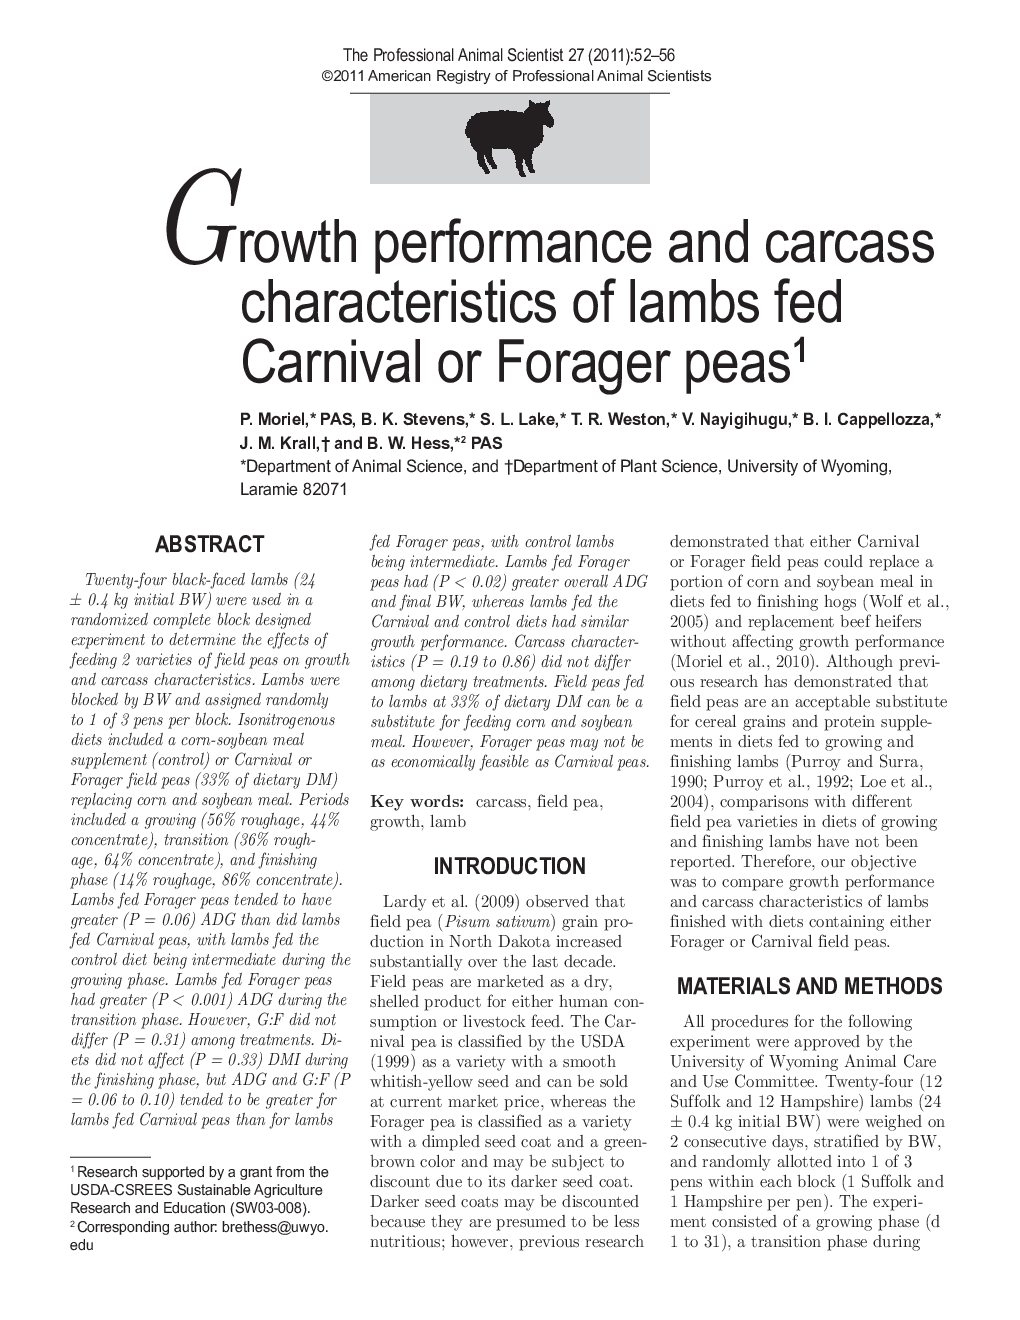 Growth performance and carcass characteristics of lambs fed Carnival or Forager peas1